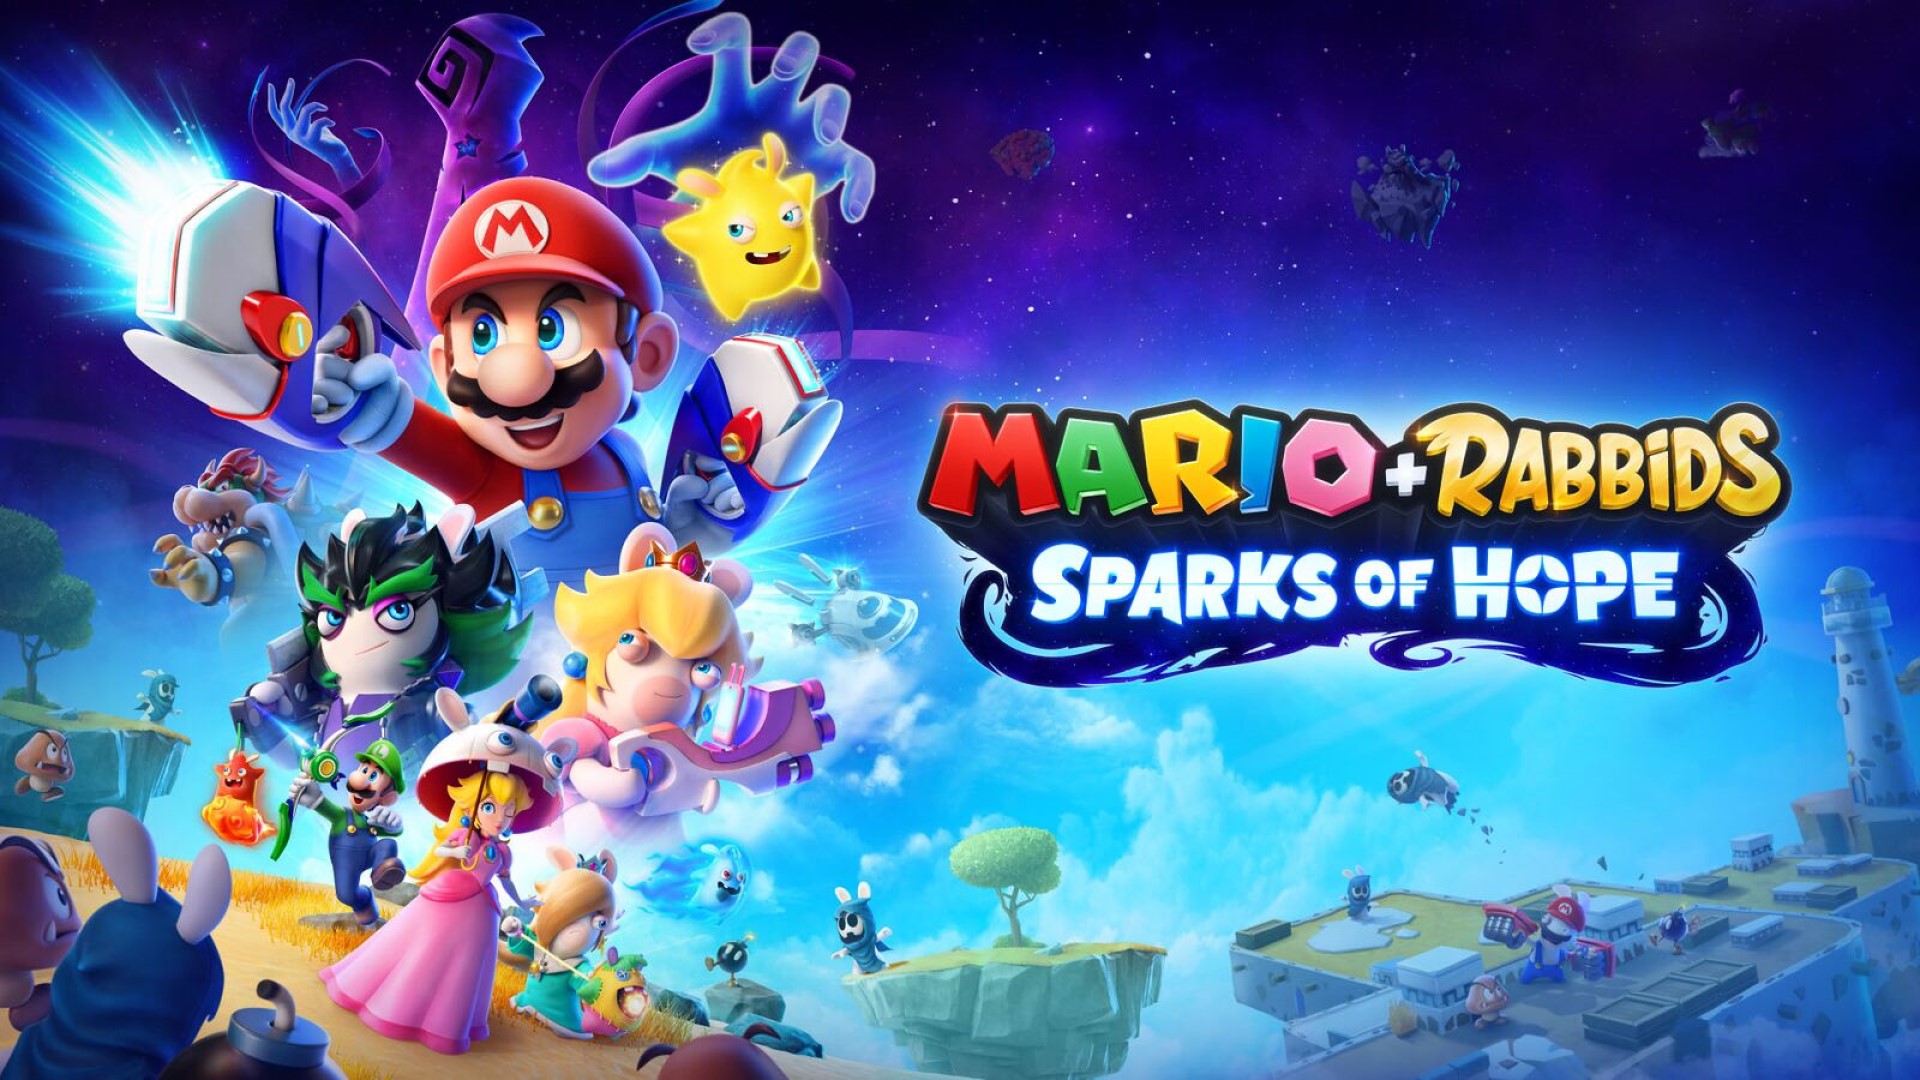 Mario + Rabbids Sparks of Hope Trailer Highlights Critical
Acclaim